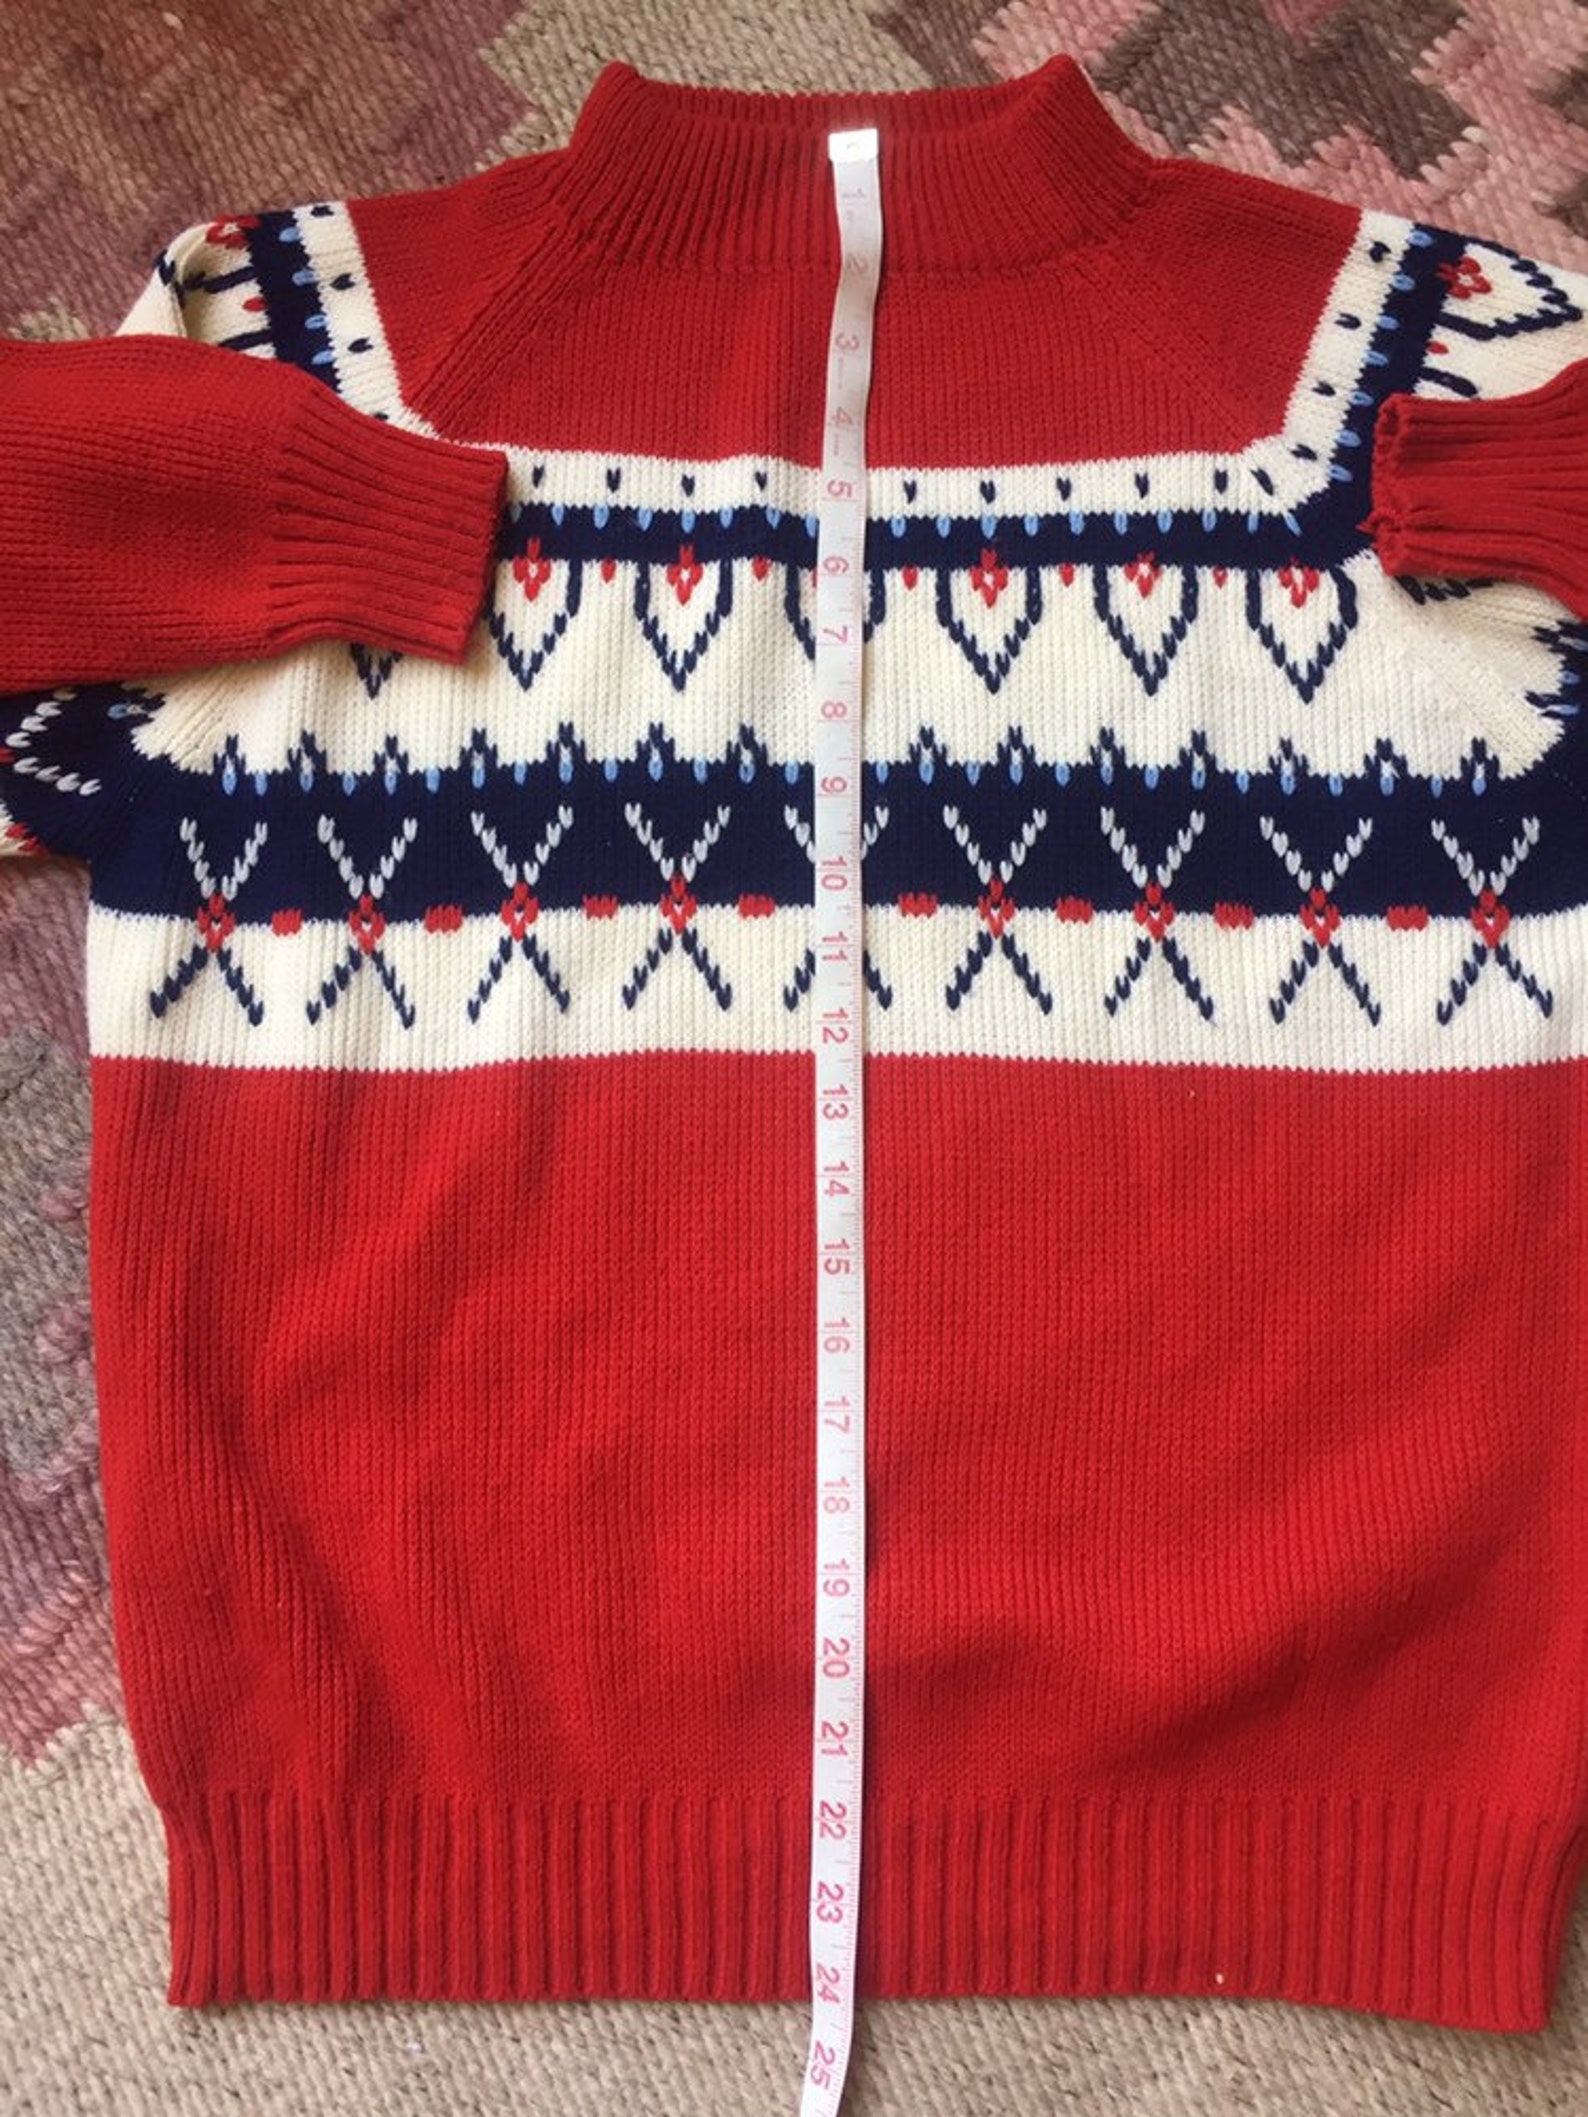 Late 1970s Jcpenney Acrylic Sweater. Tag Size MD - Etsy